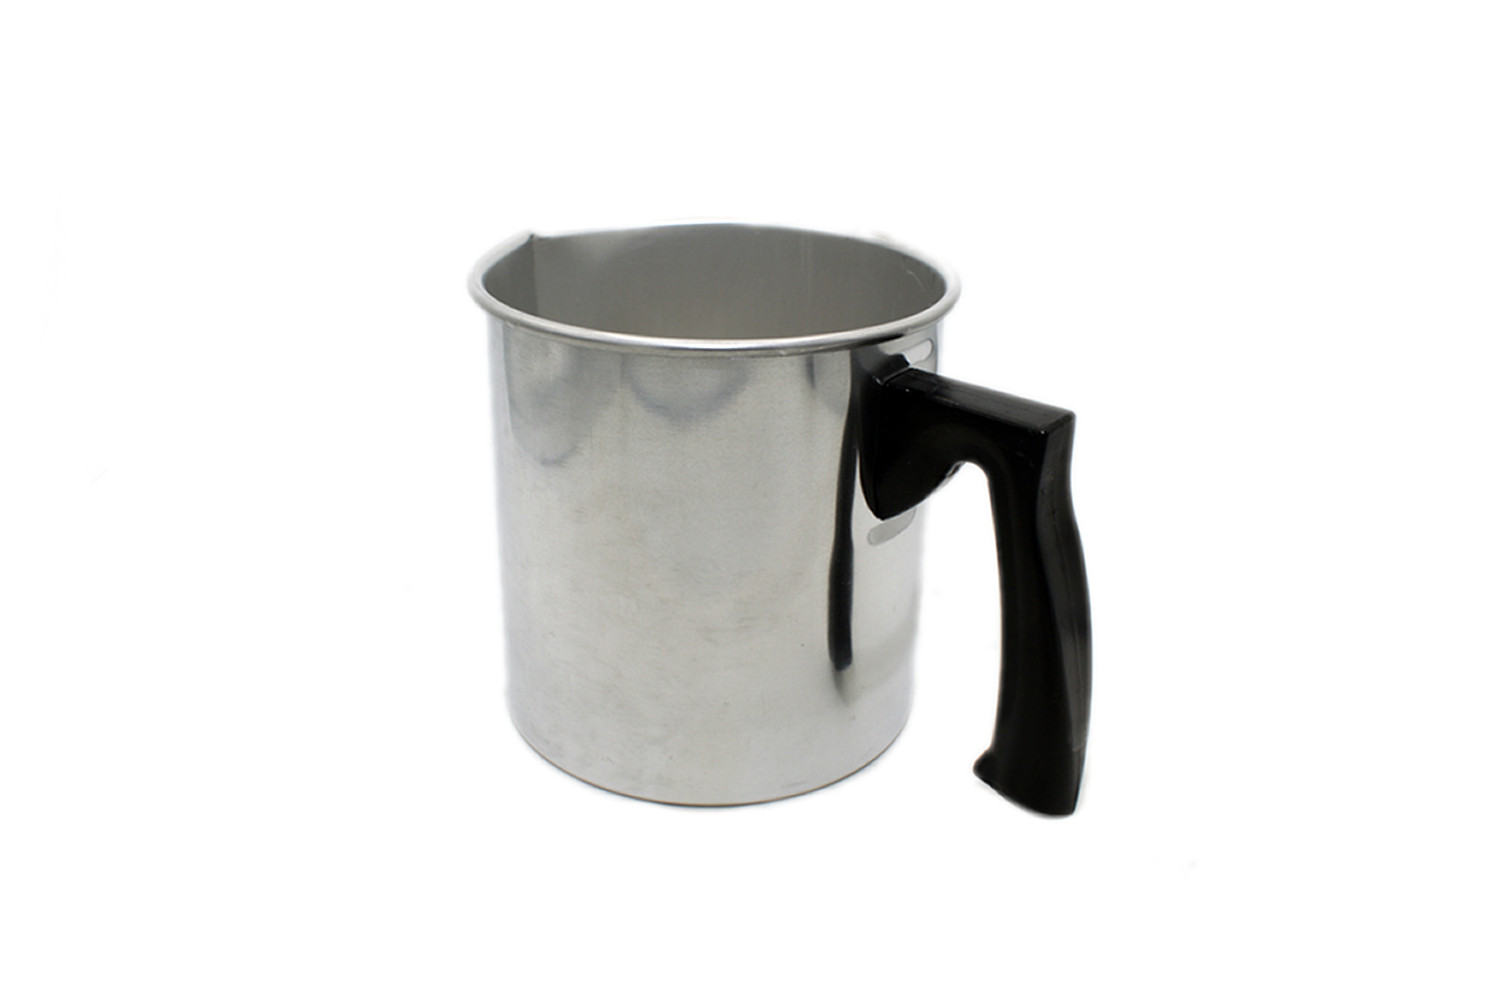 Candle Making Pouring Pot, Stainless Steel Double Boiler Wax Melting Pitcher